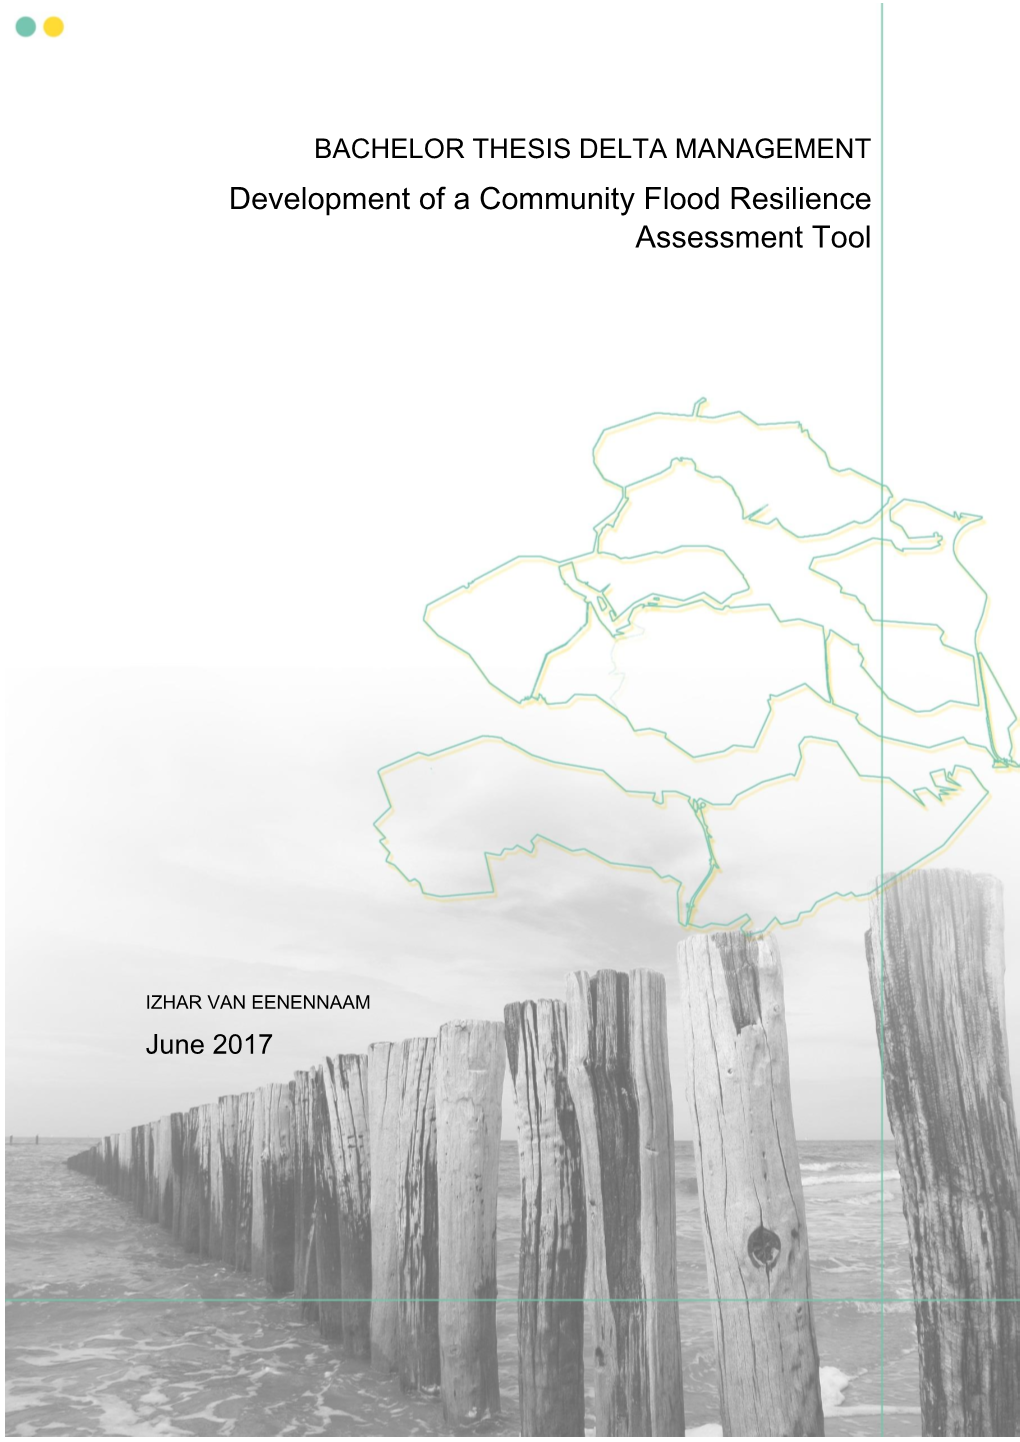 BACHELOR THESIS DELTA MANAGEMENT Development of a Community Flood Resilience Assessment Tool